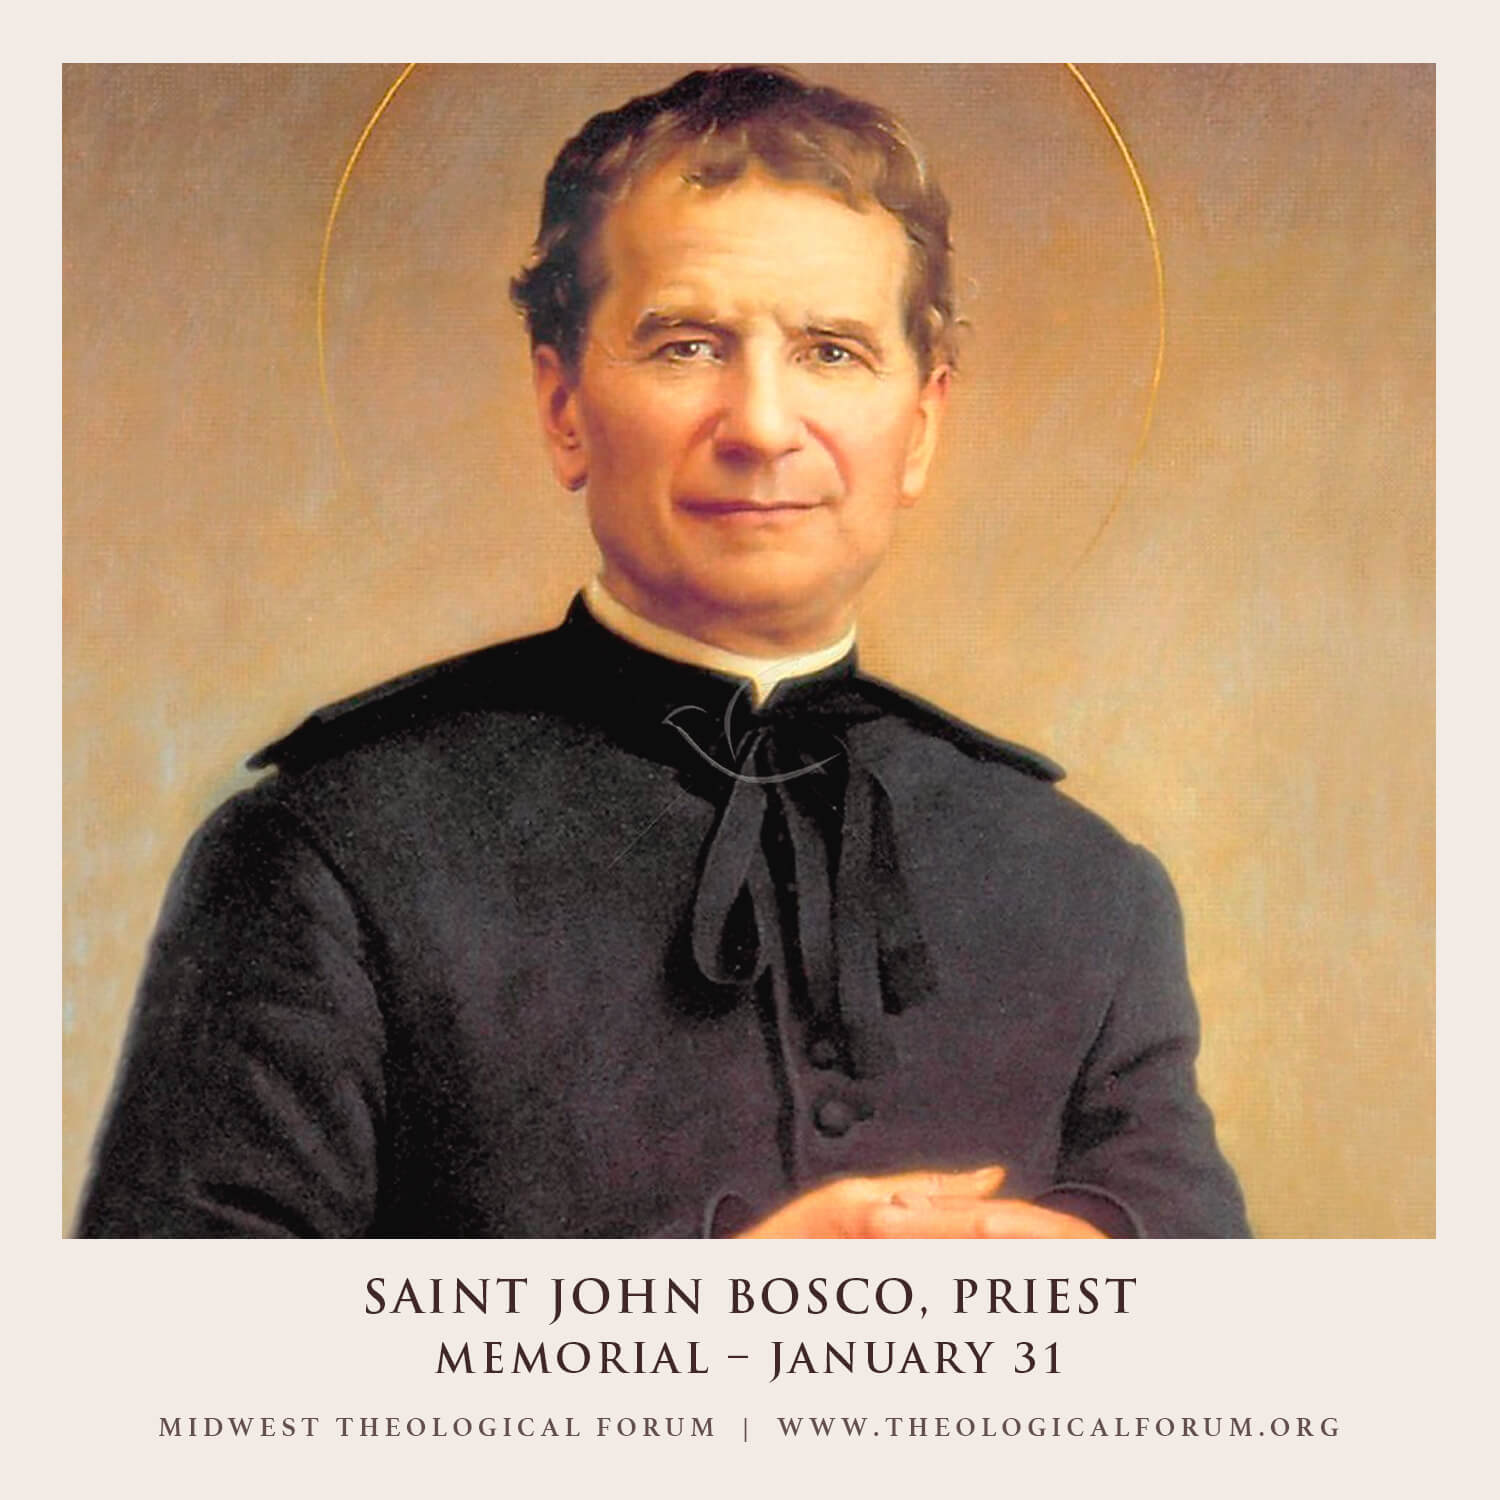 st-john-bosco-s-lifework-was-educating-young-people-he-combined-catechetical-training-and